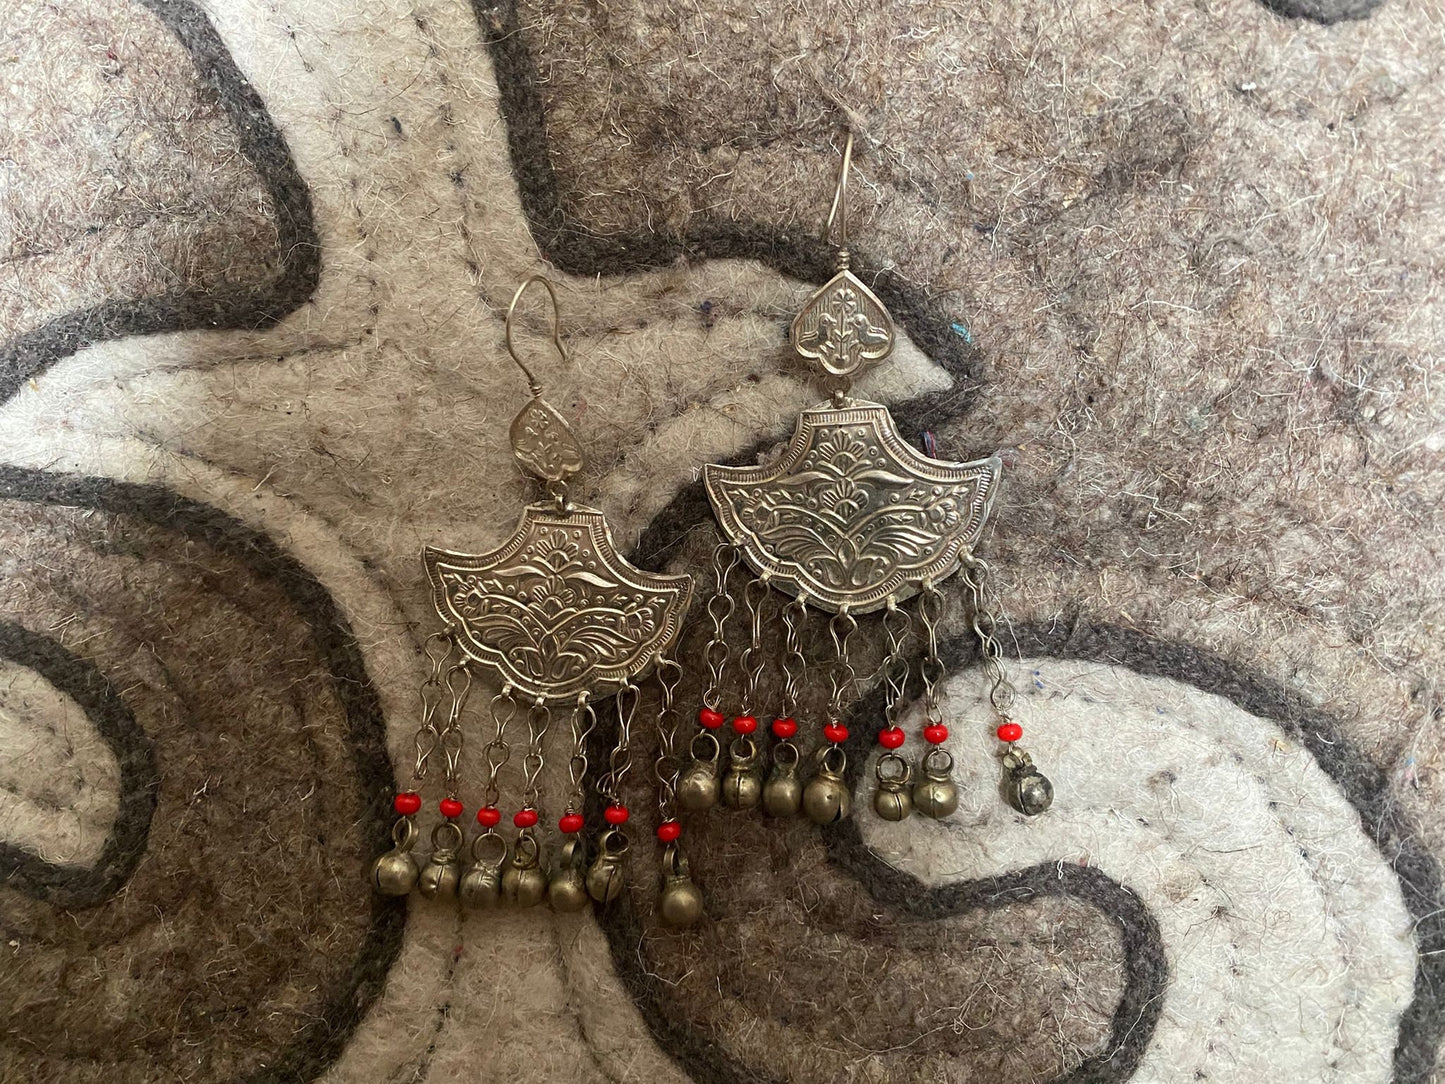 Traditional Earrings with local ornaments